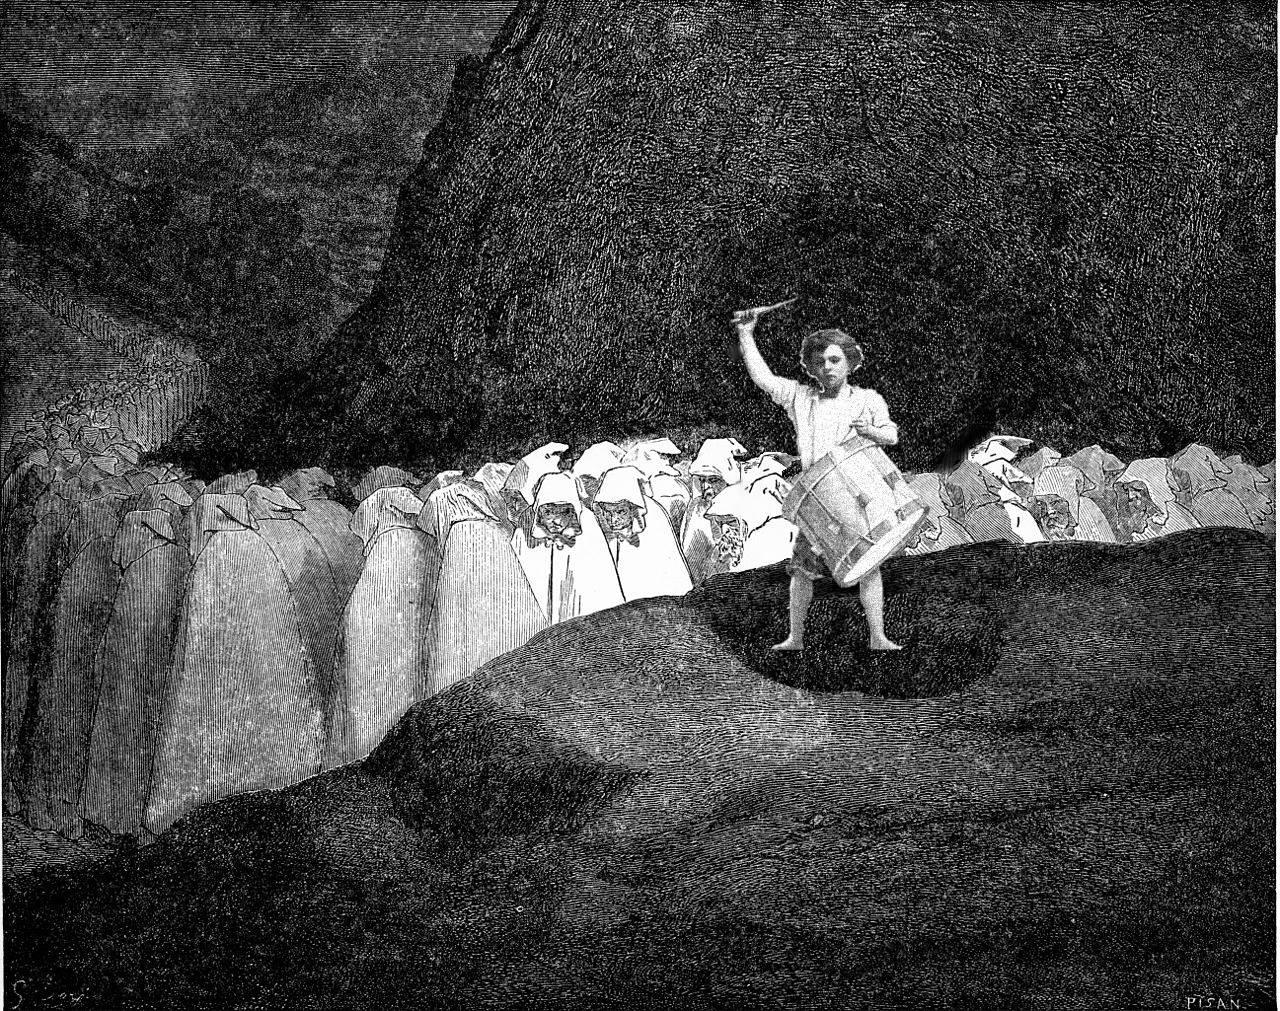 The Boy in Hell: Gustave Dore by way of Mandy Henning